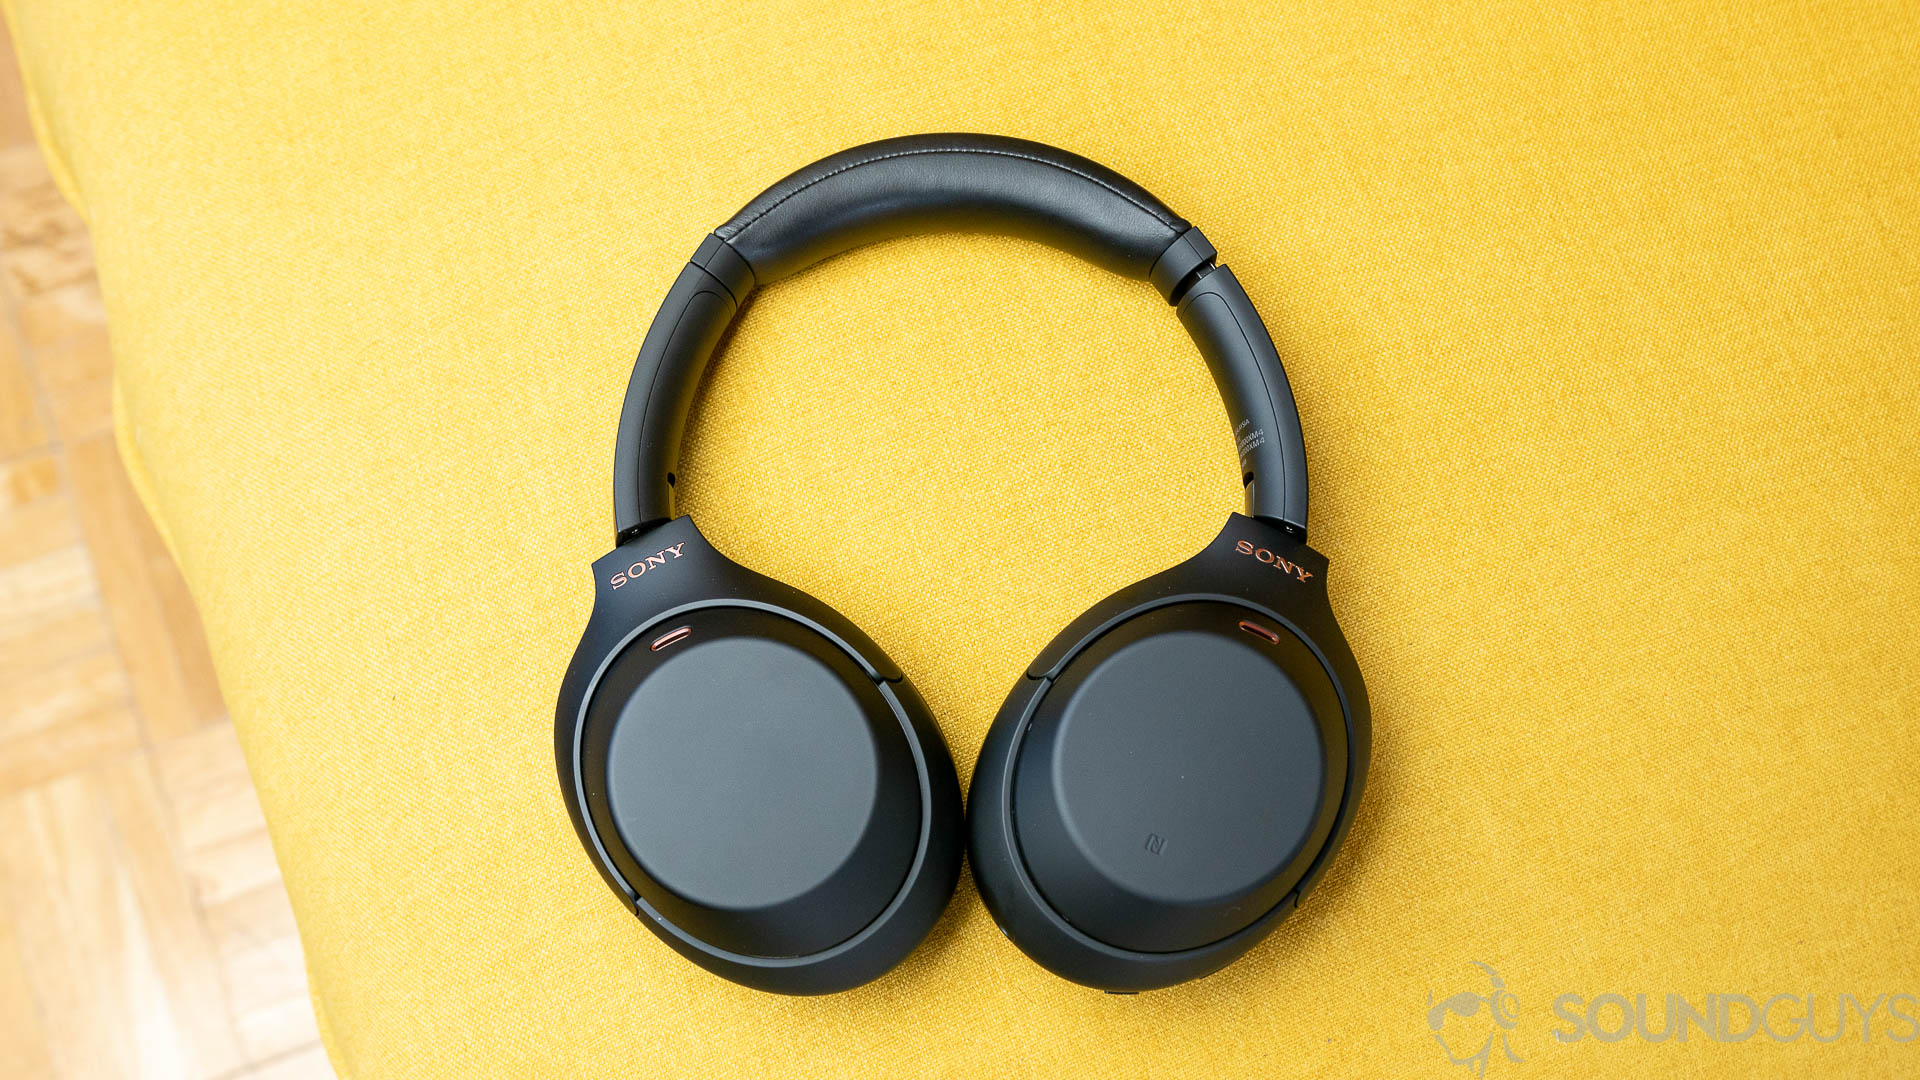 The Sony WH-1000XM4 noise cancelling headphones full yellow backdrop. - The best productivity gadgets